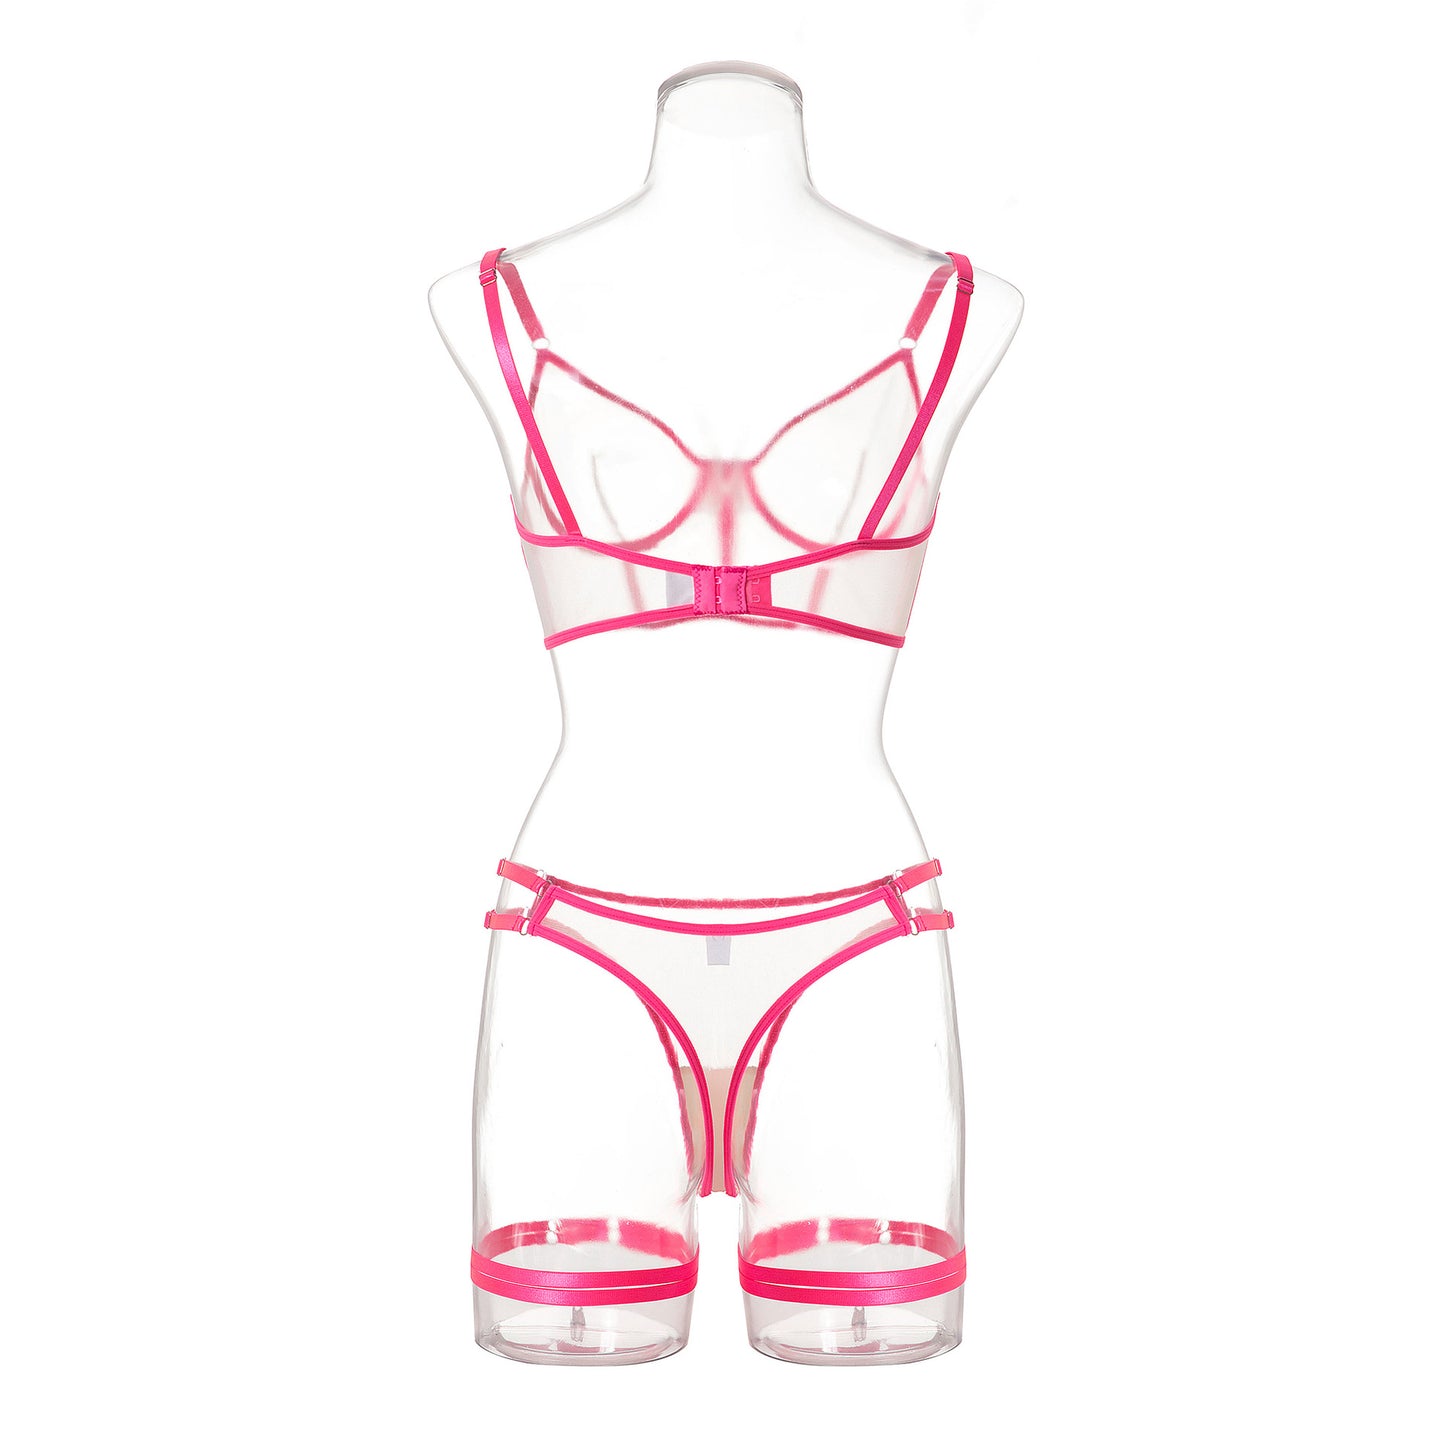 Lingerie Outfits | Neon Pink See Through Lingerie Outfit